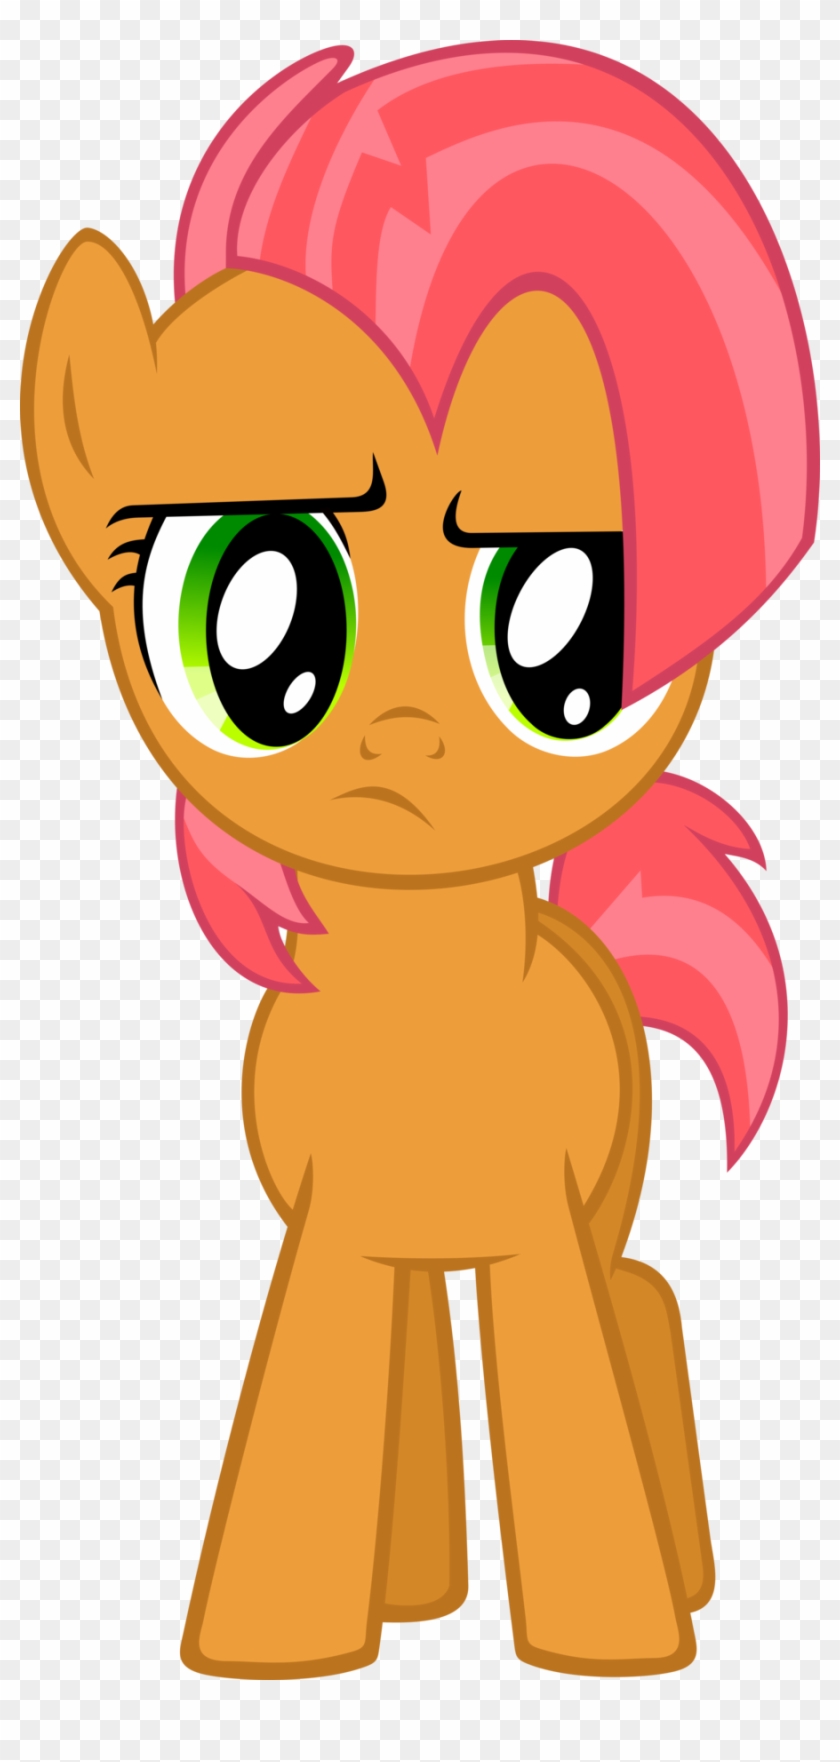 Babs Seed - Mlp Babs Seed Transparent #907101